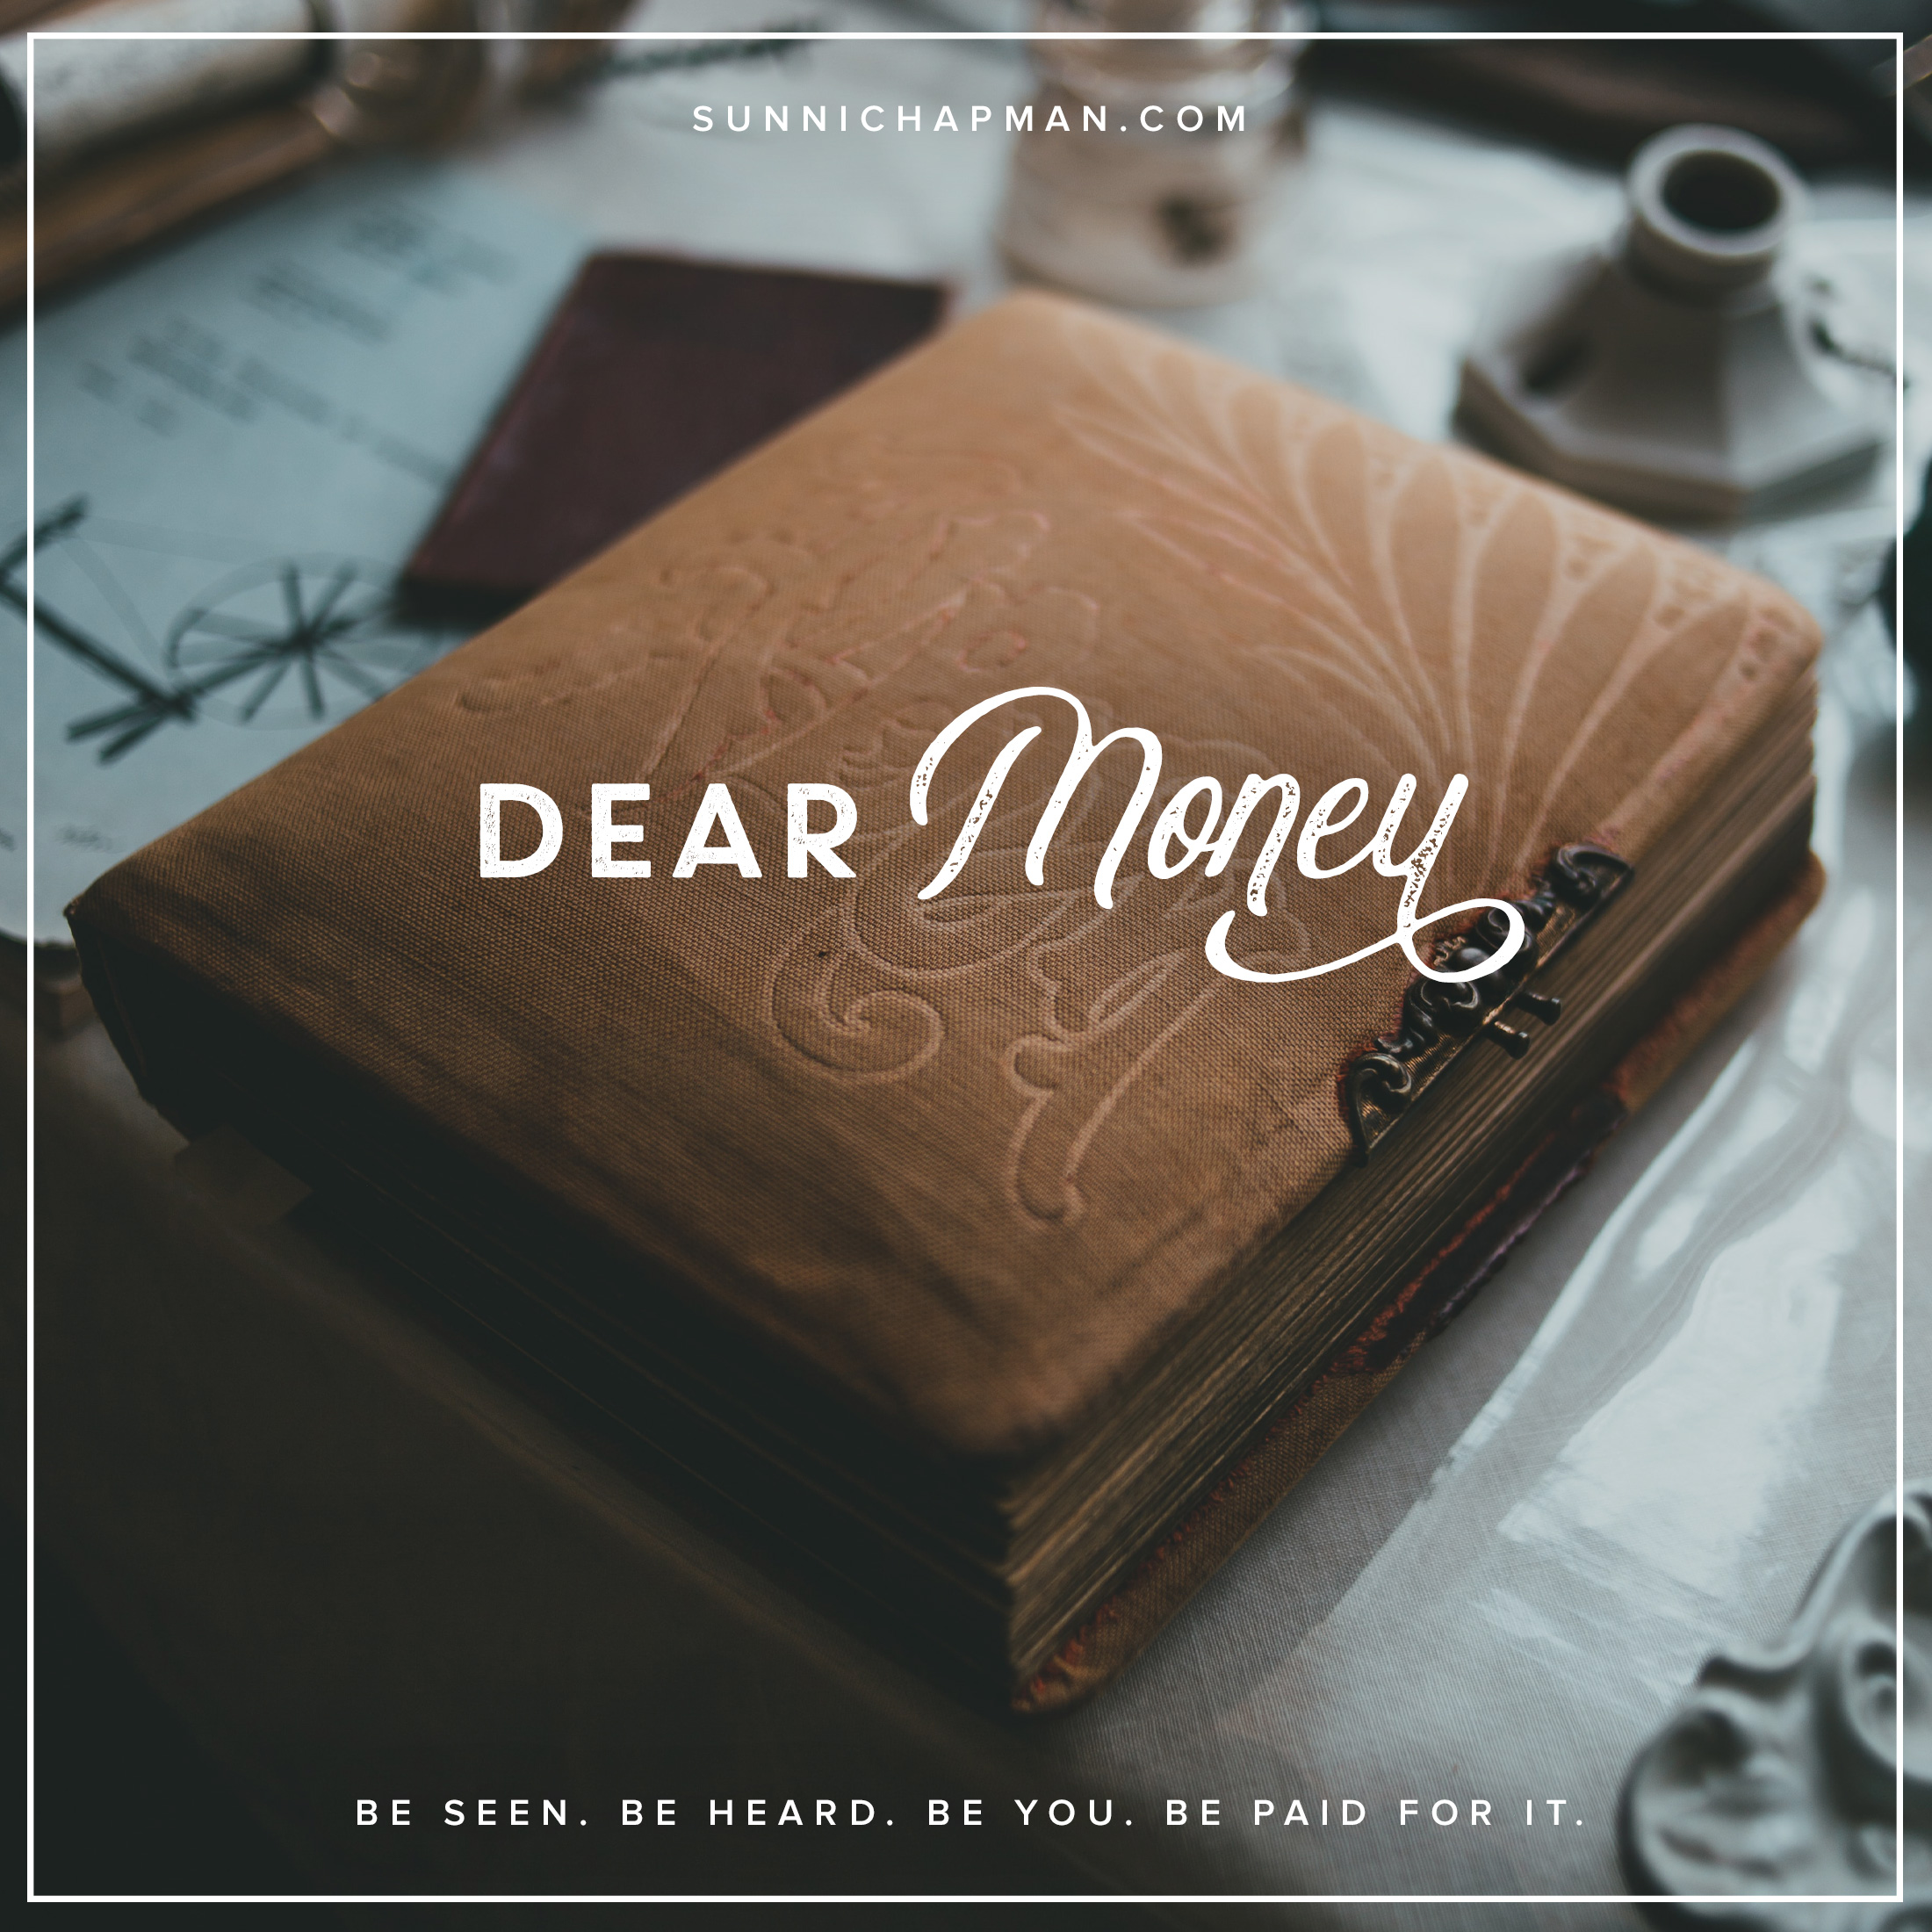 Vintage notebook/diary on the table and text: Dear Money